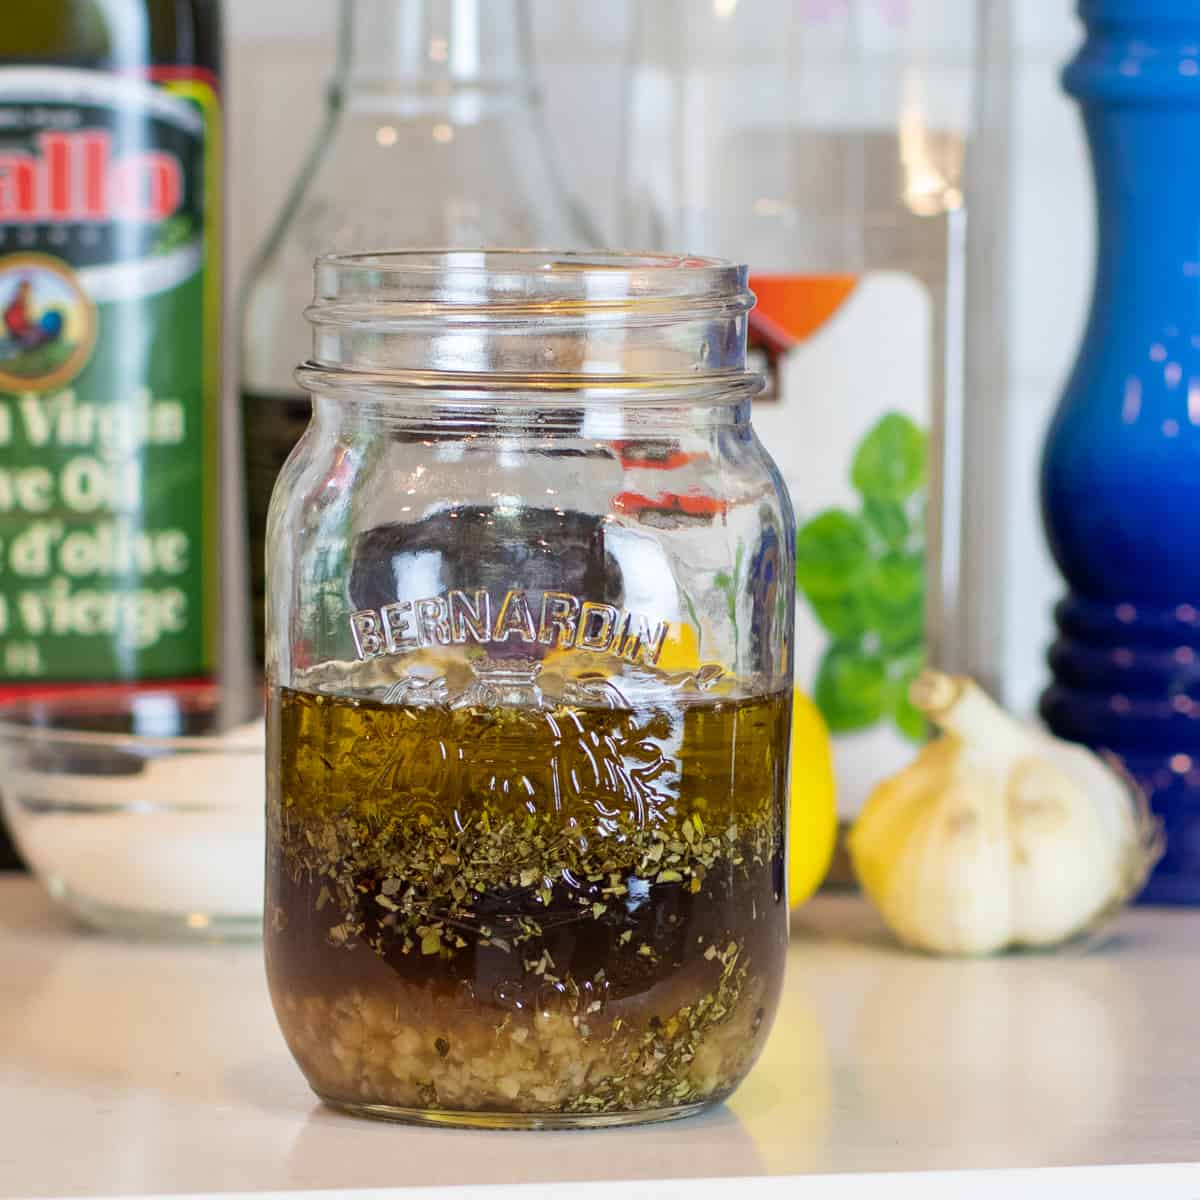 A mason jar with salad dressing in front of bottles and other containers.